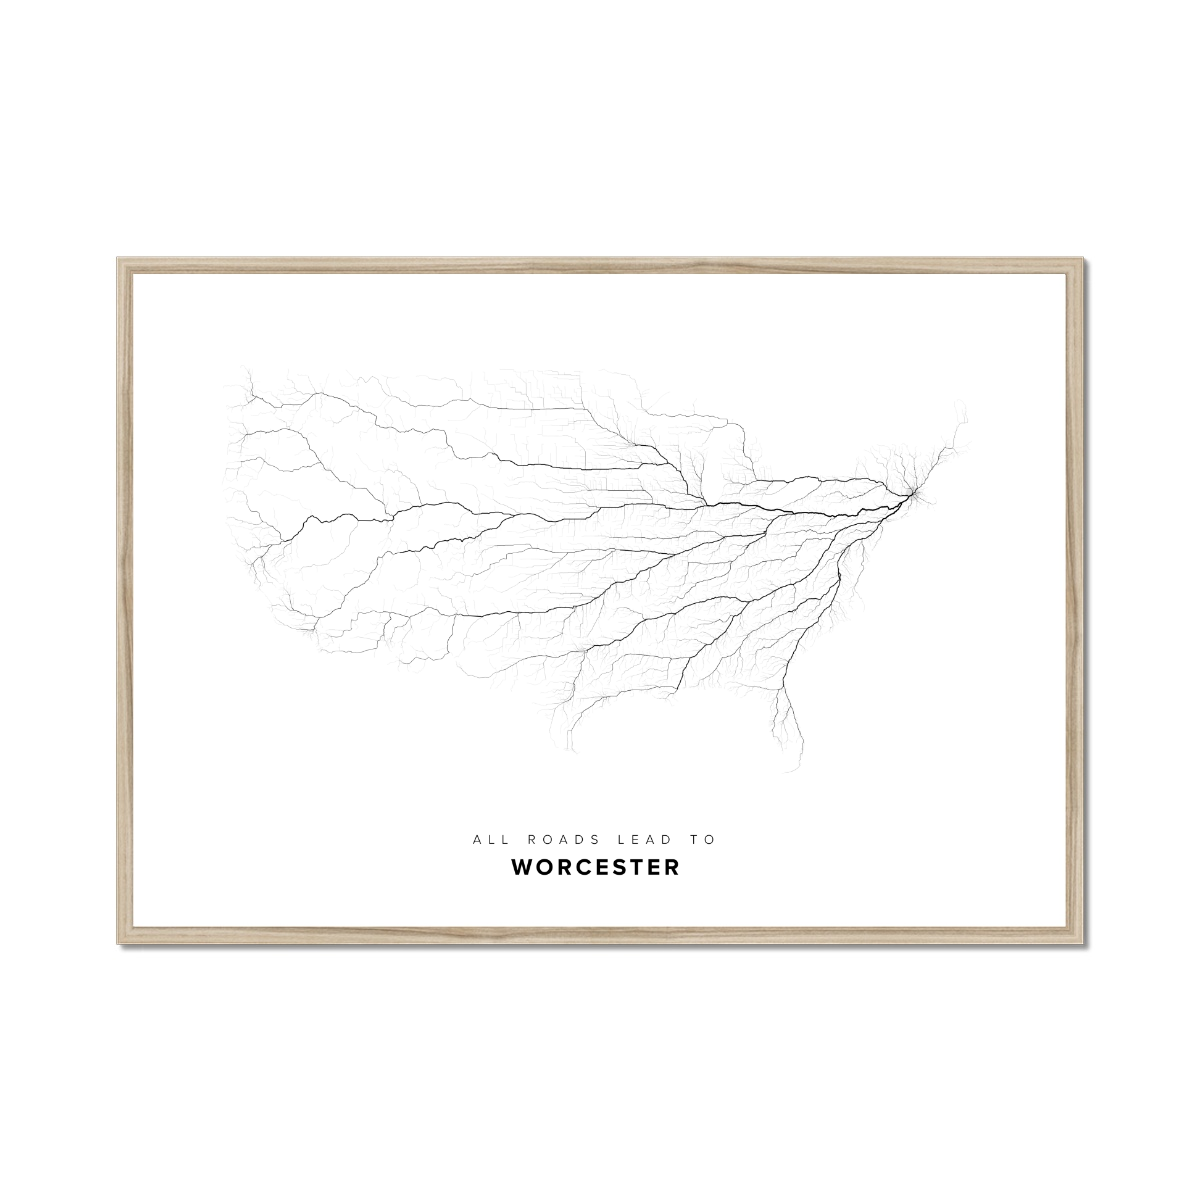 All roads lead to Worcester (United States of America) Fine Art Map Print